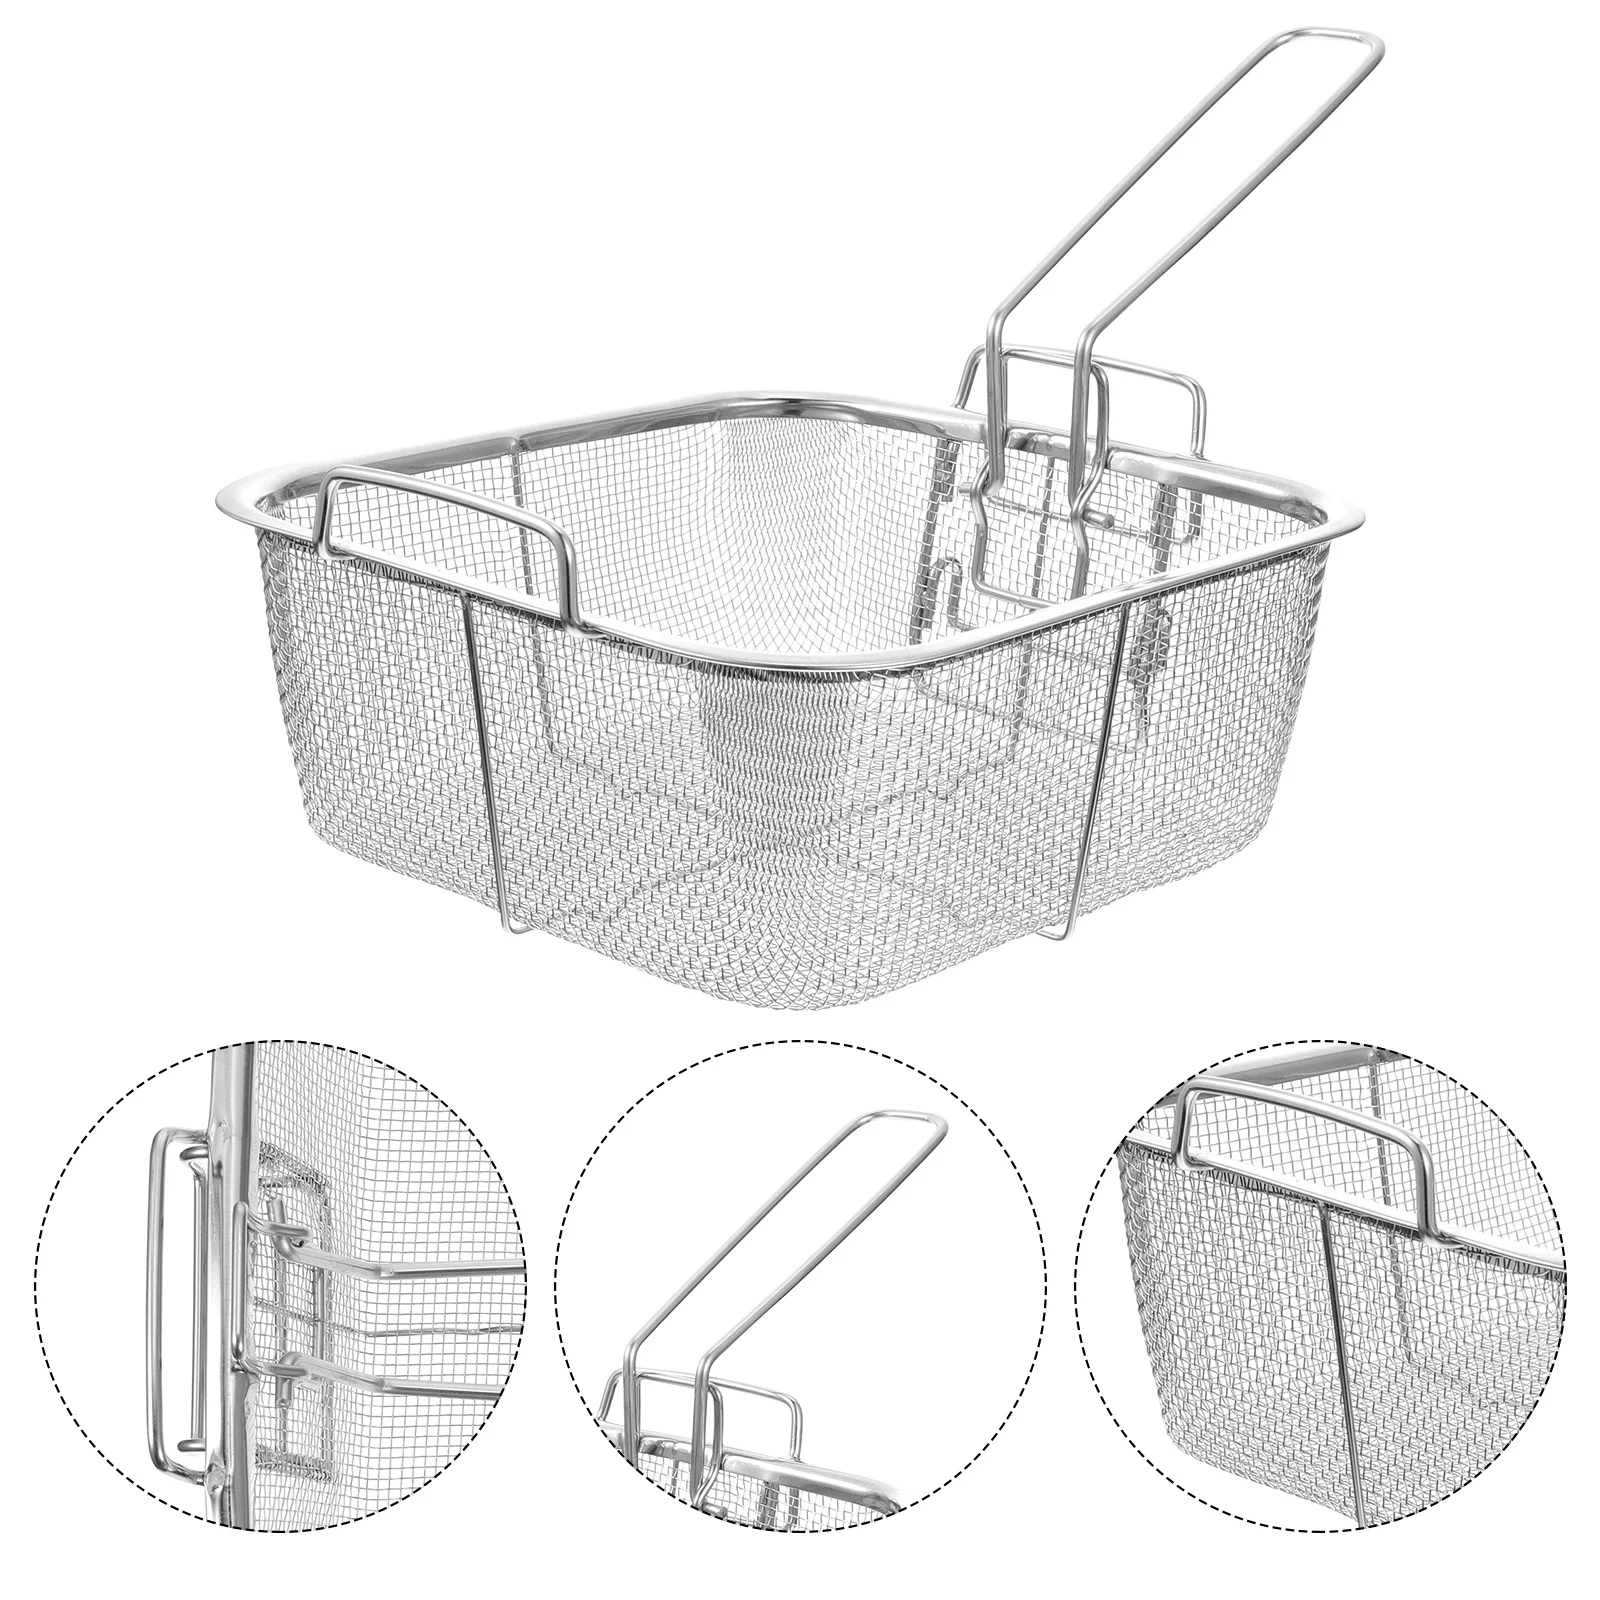 

Basket Fry Frying Fryer French Strainer Chip Deep Fries Baskets Fried Mesh Metal Mini Cooking Wire Net Serving Holder Potato